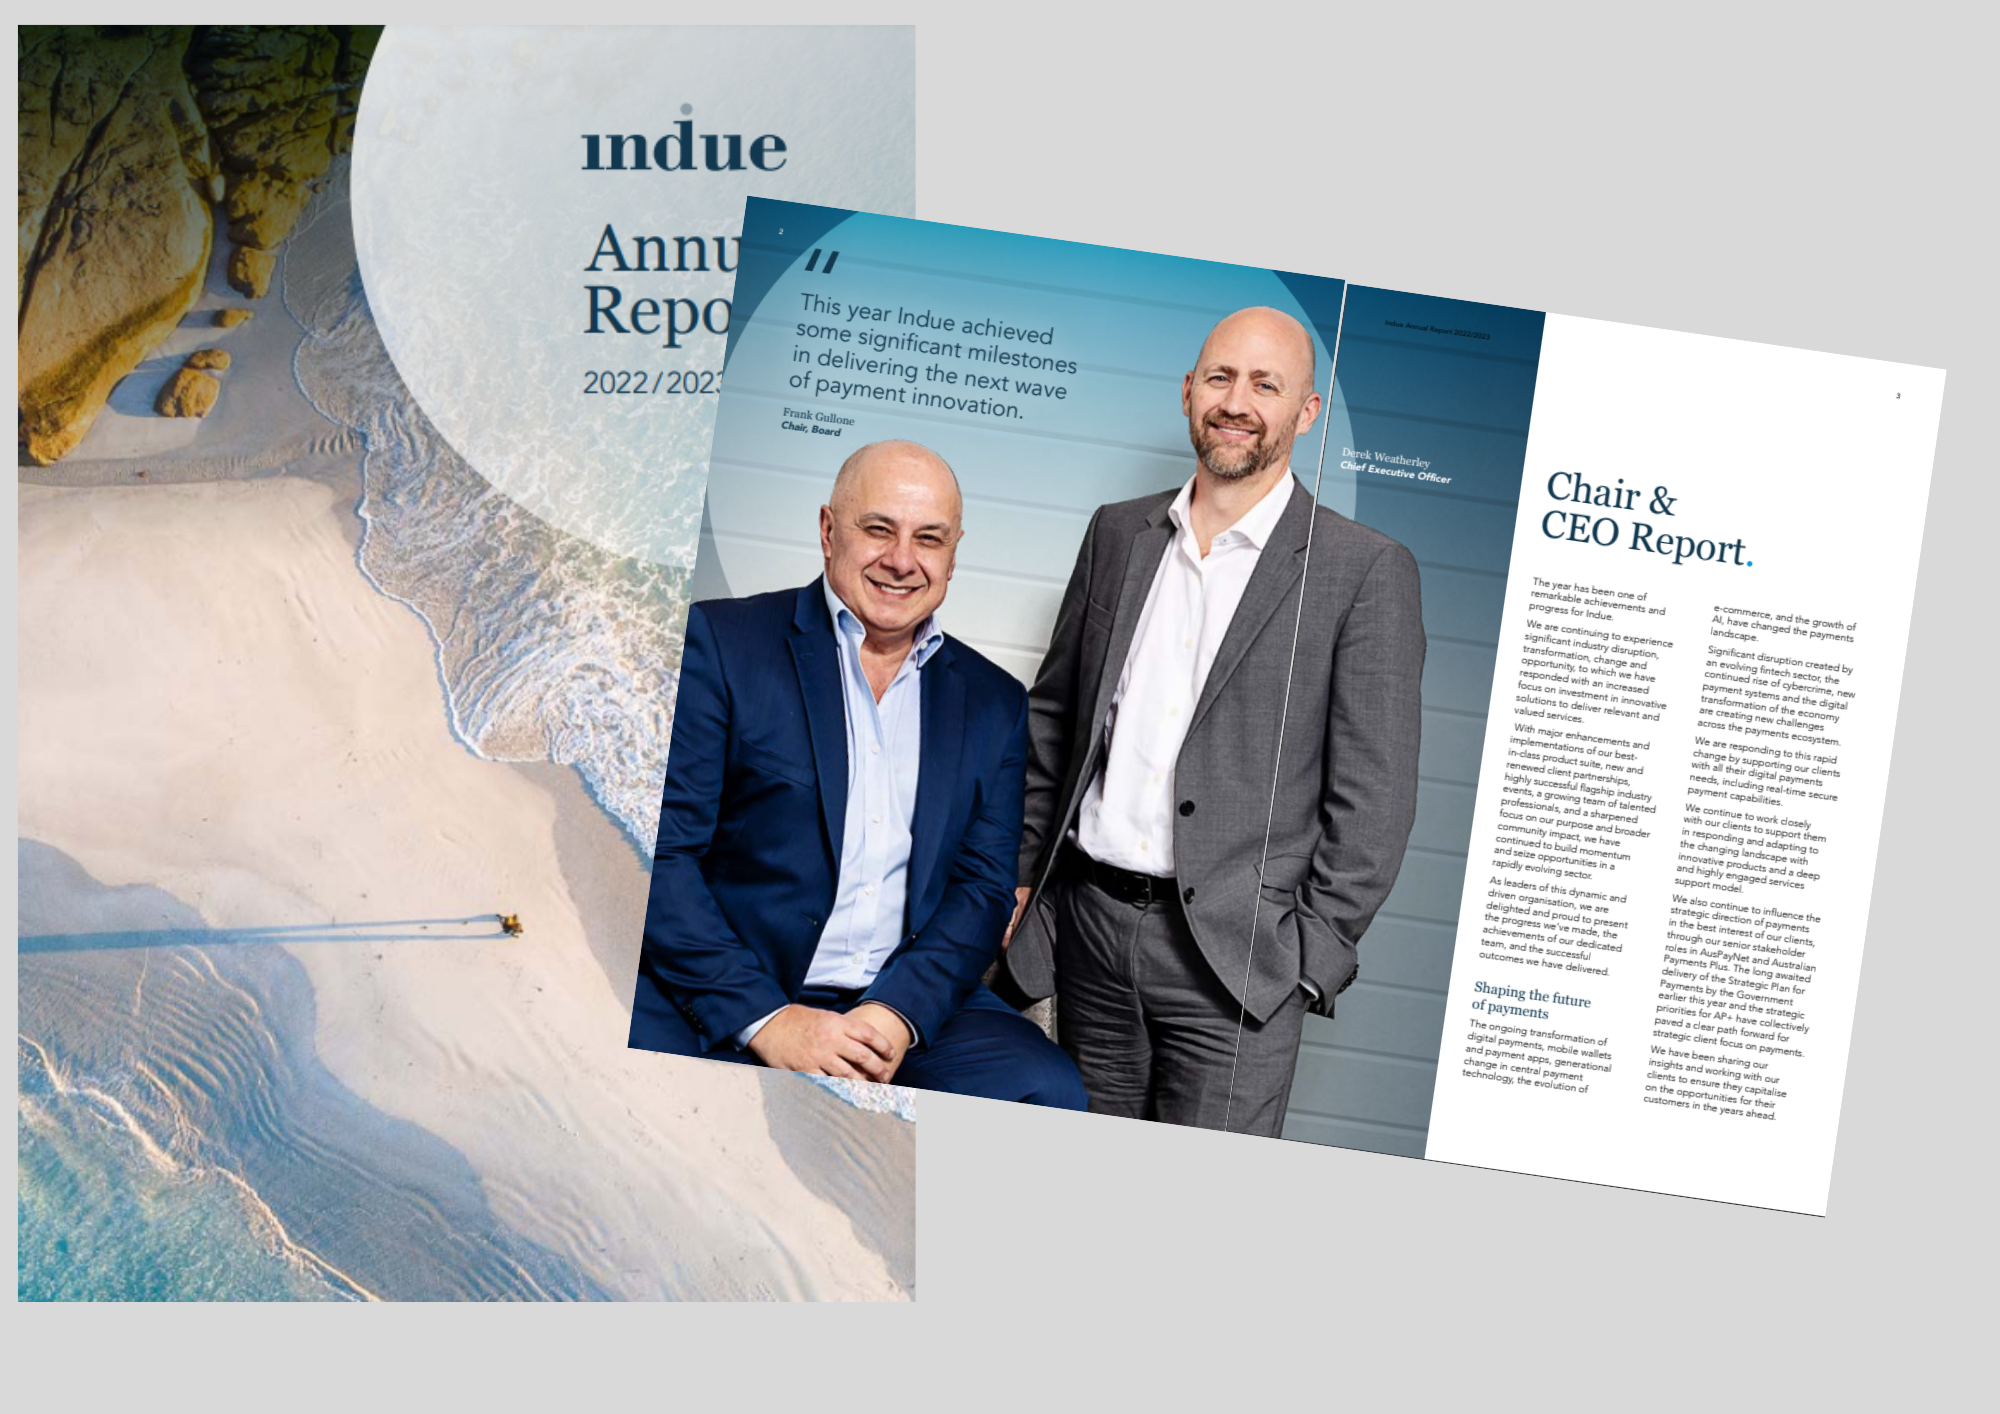 Indue’s Annual Report 2023